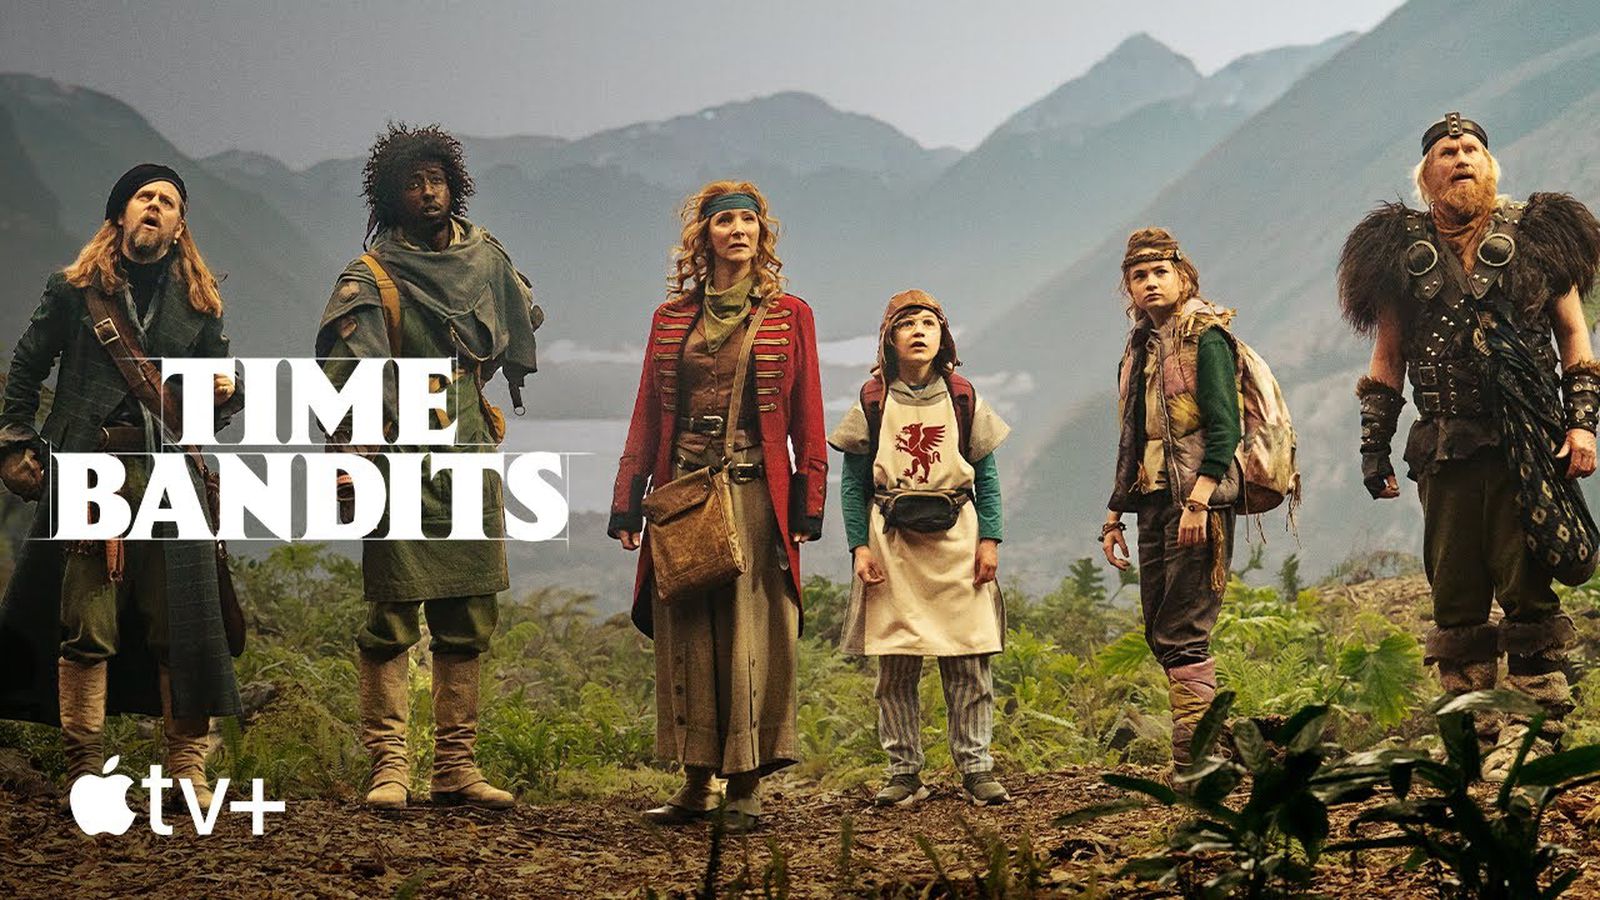 Apple releases trailer for upcoming Taika Waititi series “Time Bandits”